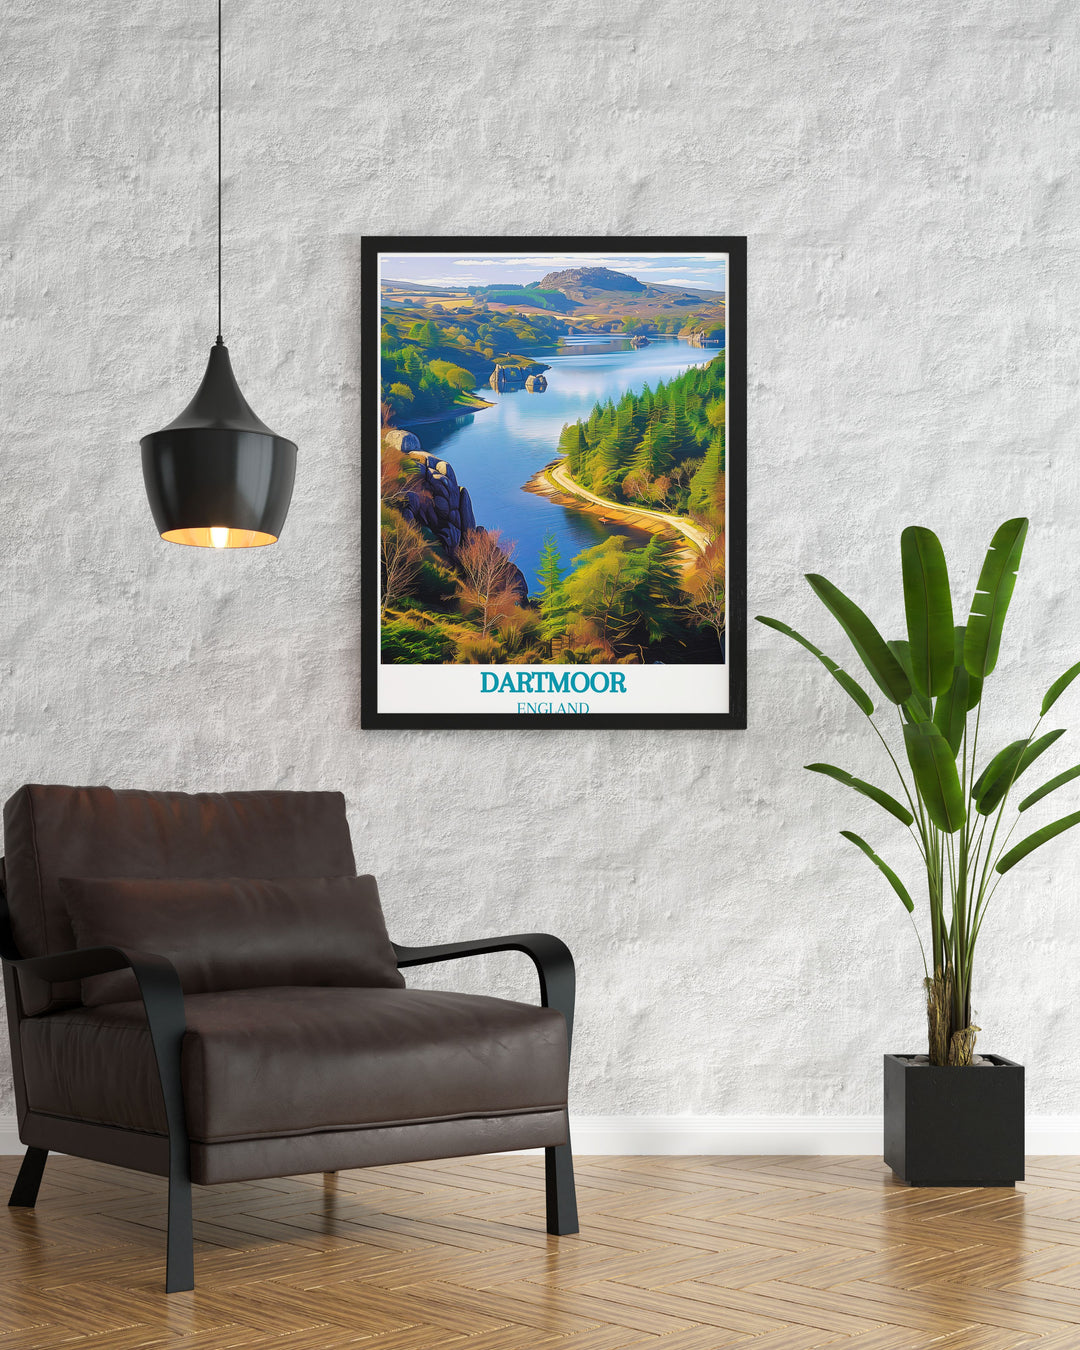 A detailed print of Dartmoor National Park capturing the expansive moorland and scenic beauty of Englands countryside, perfect for nature enthusiasts.